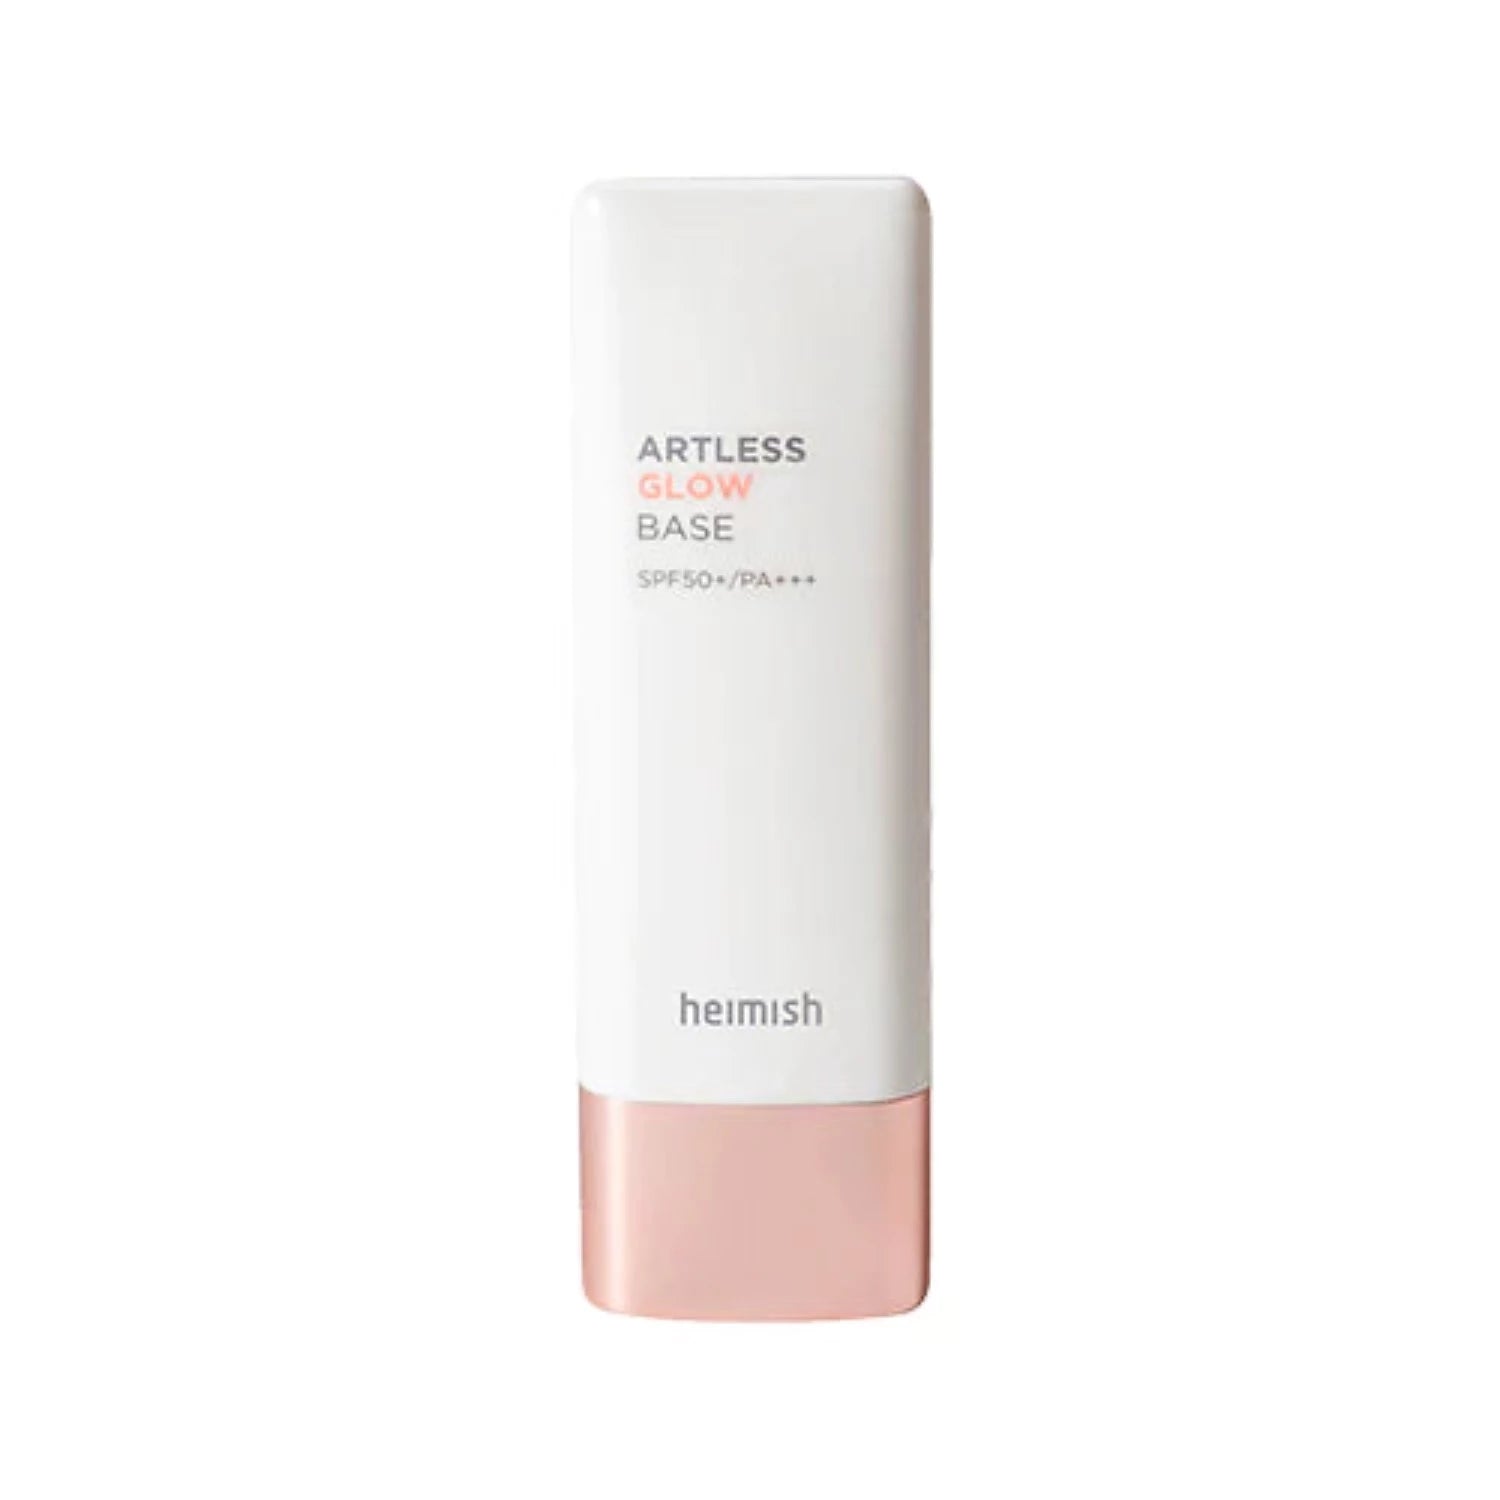 Heimish Artless Glow Base is a multifunctional product, combining a primer and a hydrating sunscreen.